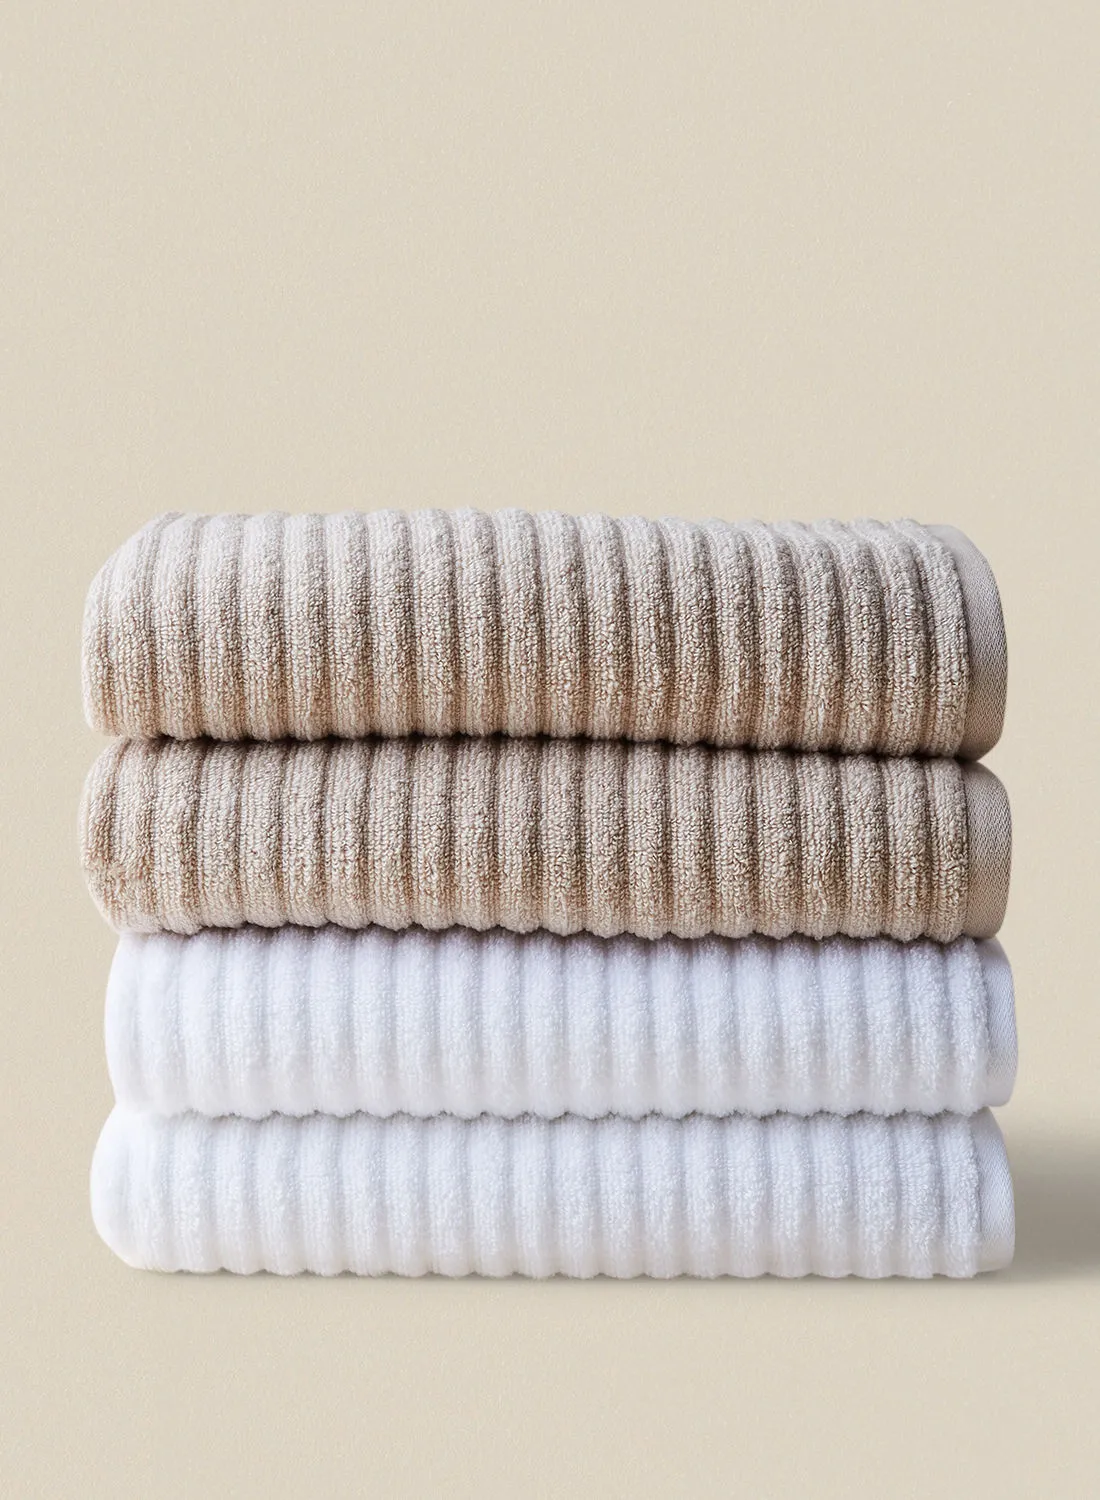 noon east 4 Piece Bathroom Towel Set - 450 GSM 100% Cotton Ribbed - 4 Bath Towel - Multicolor Linen/White Color - Highly Absorbent - Fast Dry